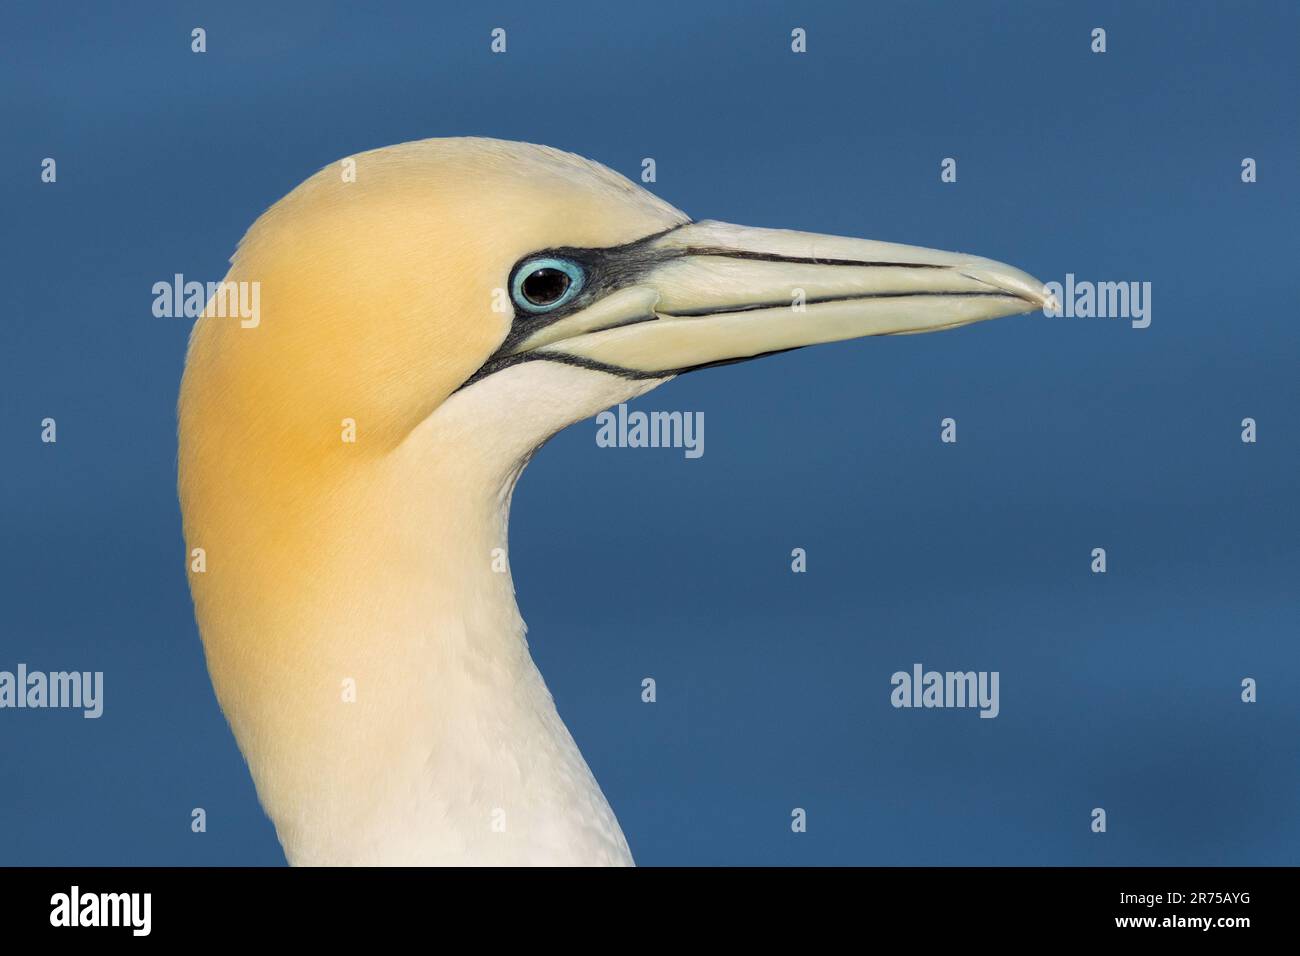 northern gannet (Sula bassana, Morus bassanus), black-eyed gannet, changing of eye colour after infection with bird flu, Germany, Schleswig-Holstein, Stock Photo